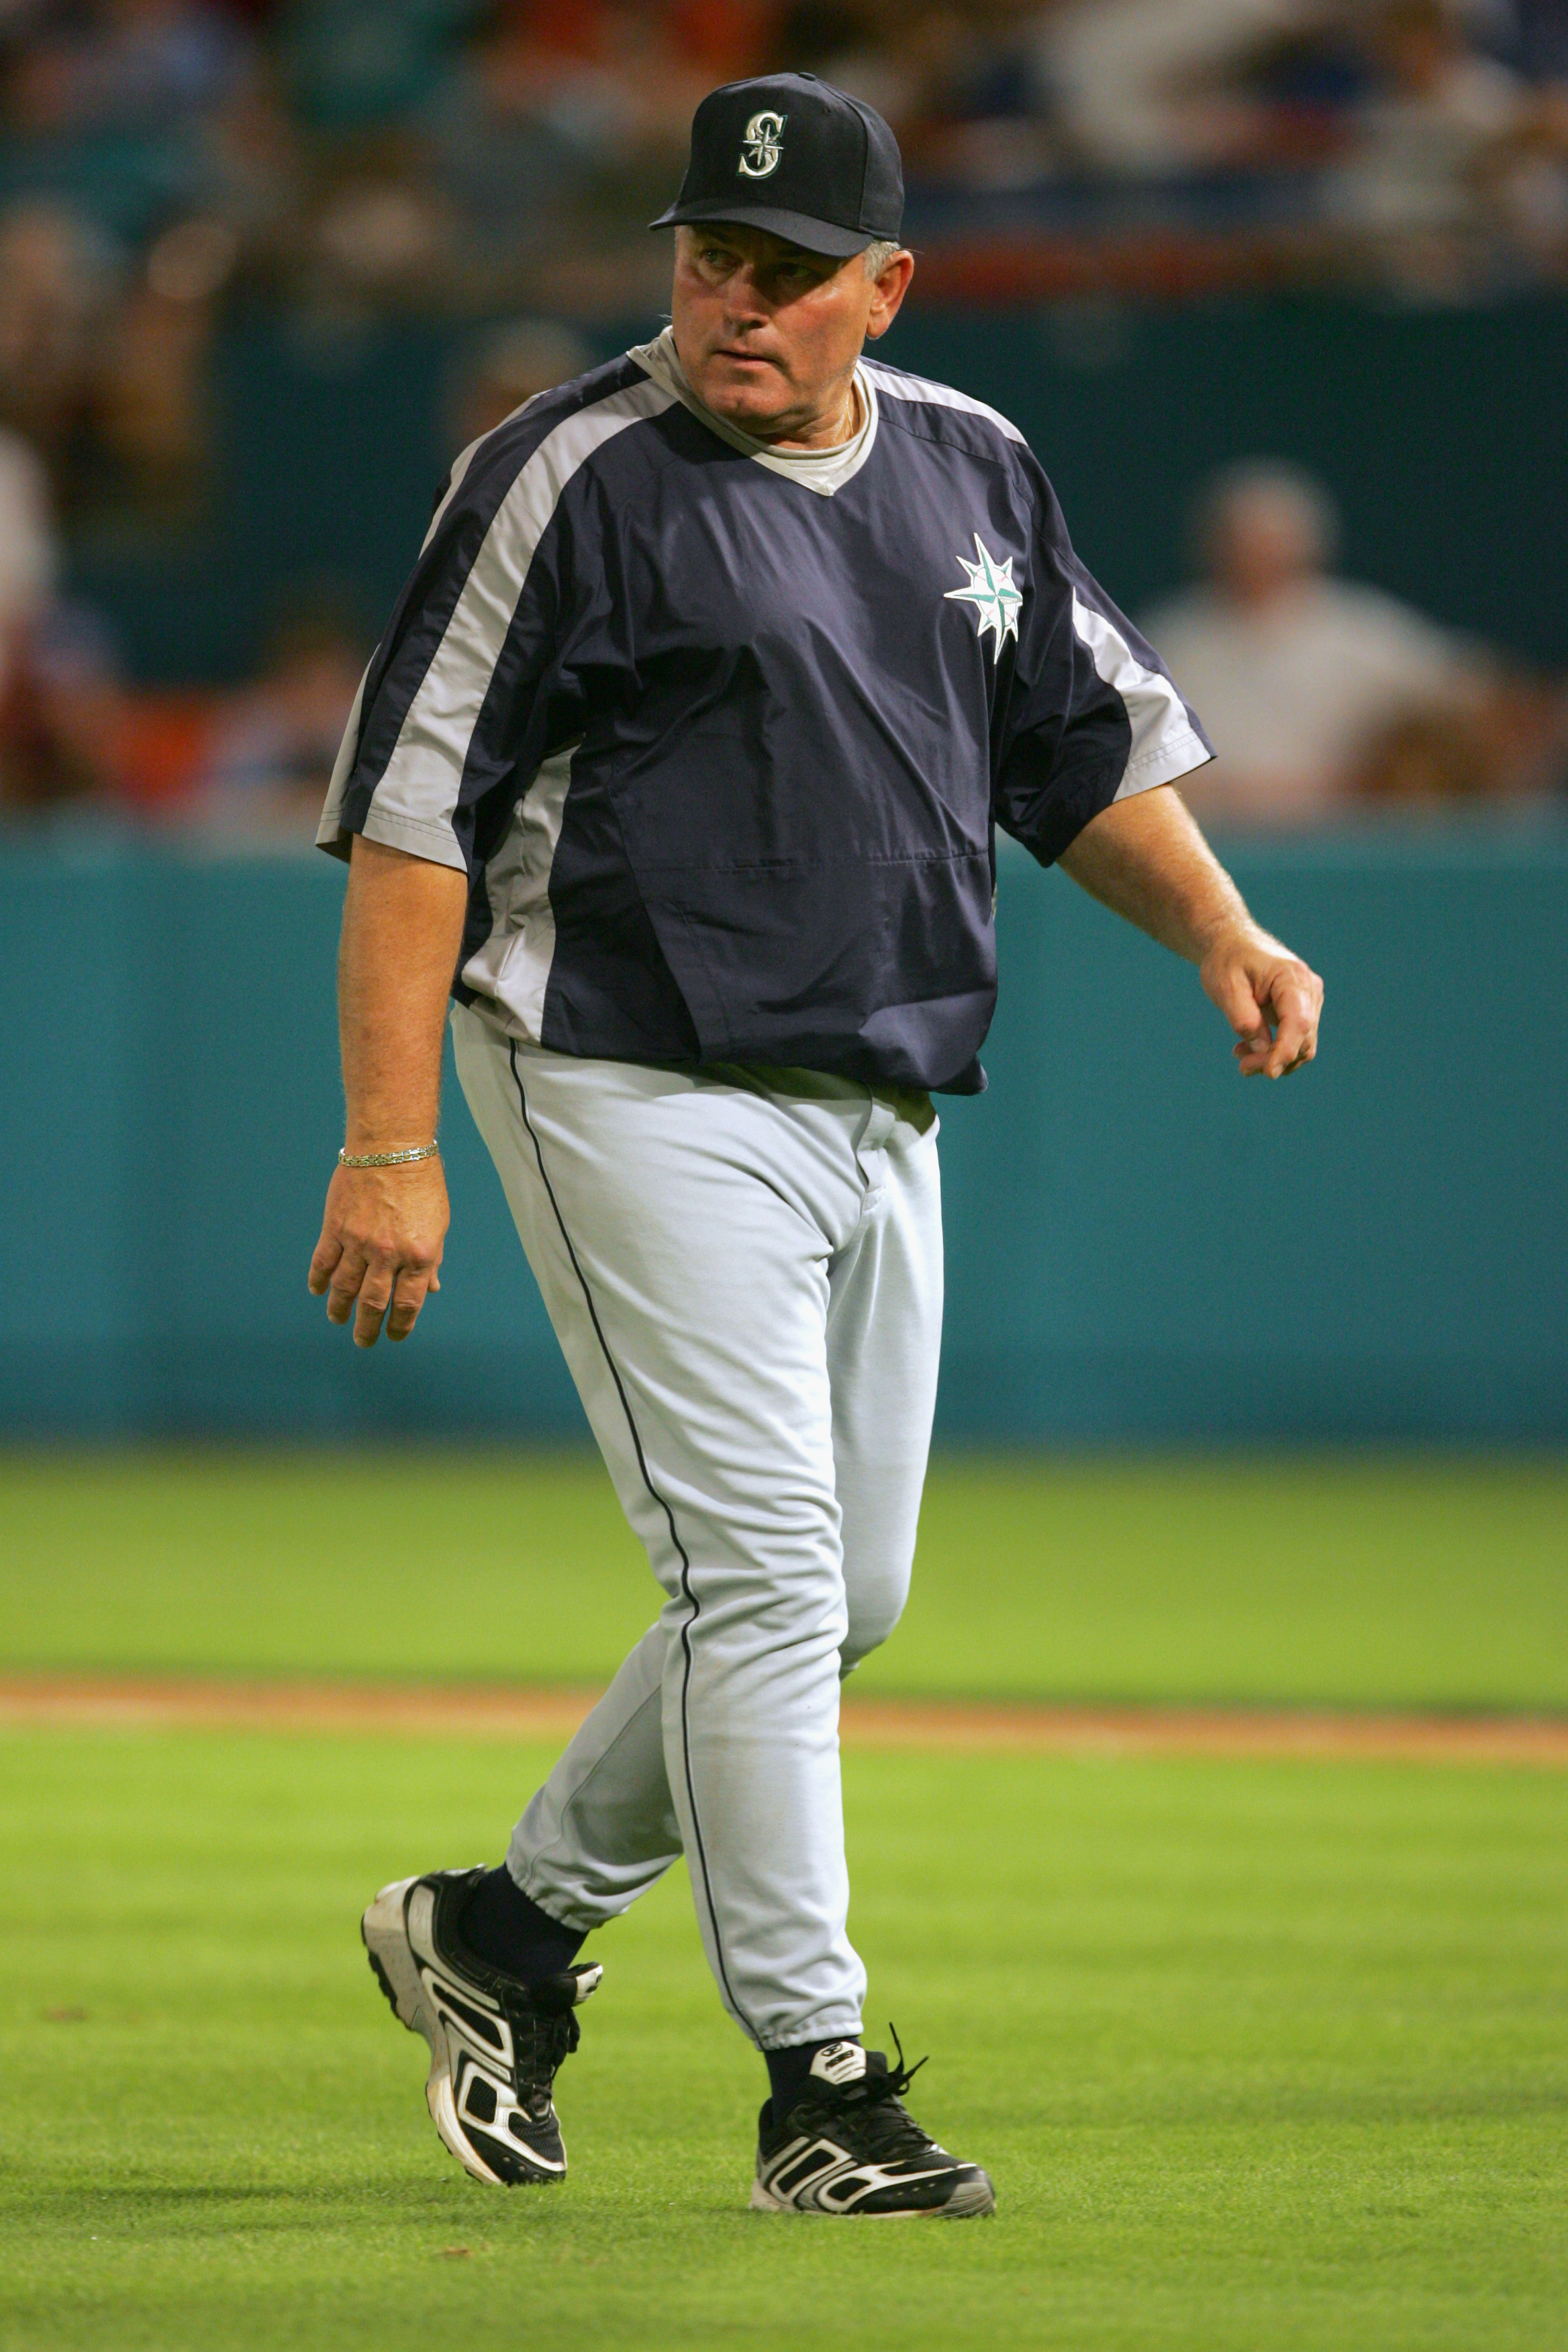 MIAMI, FL - JUNE 8:  Manager Mike Hargrove #21 of the Seattle Mariners walks on the field during the game against the Florida Marlins on June 8, 2005 at Dolphin Stadium in Miami, Florida.  The Marlins won 5-4.  (Photo by Jamie Squire/Getty Images))